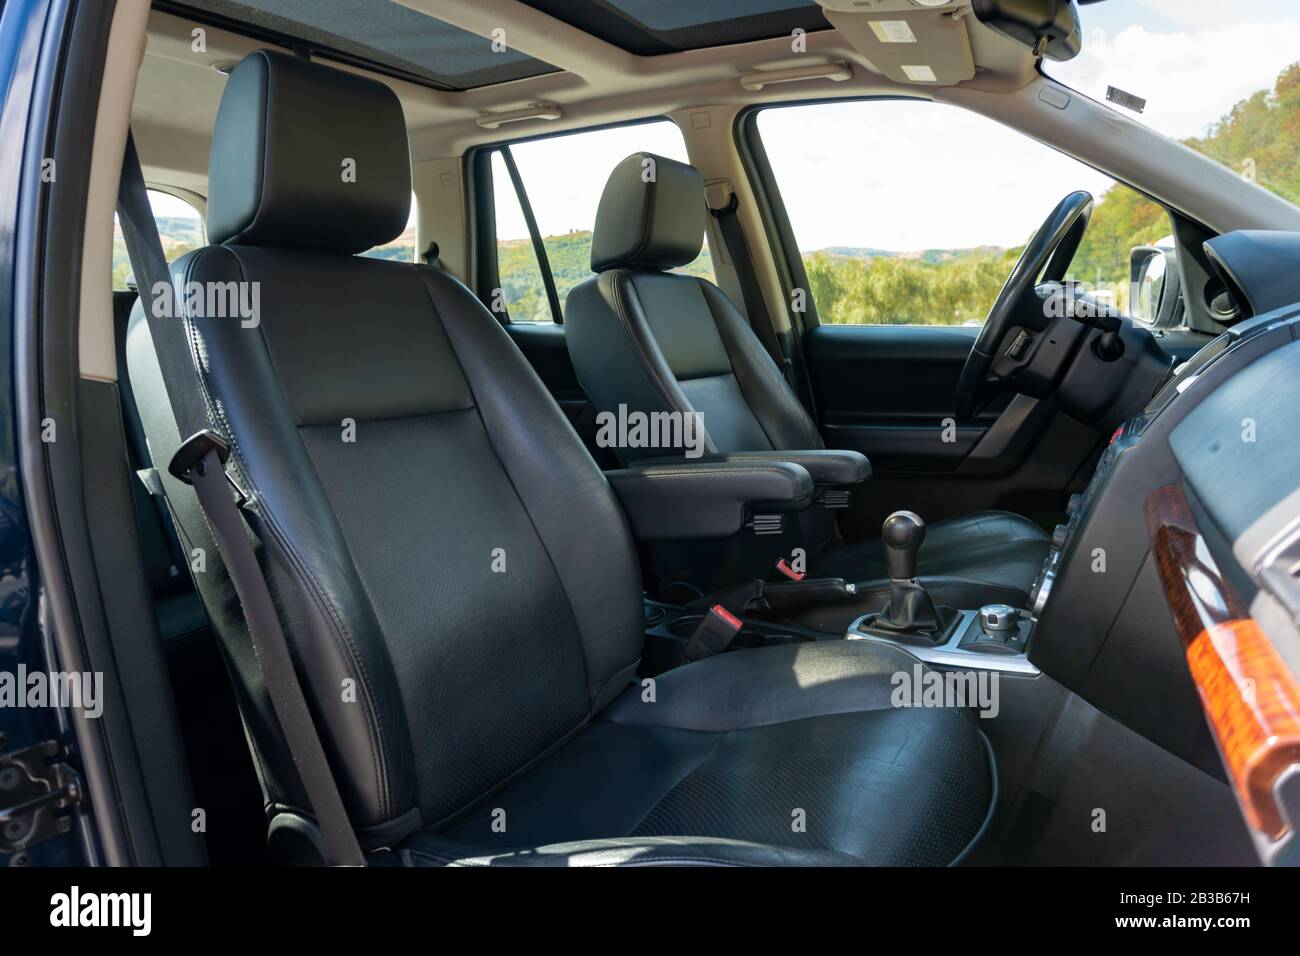 Panoramic roof - double sunroof in a luxurious suv car, glazed dach glass, blue tinted windows, and leather upholstery. Inside a luxurious SUV Stock Photo